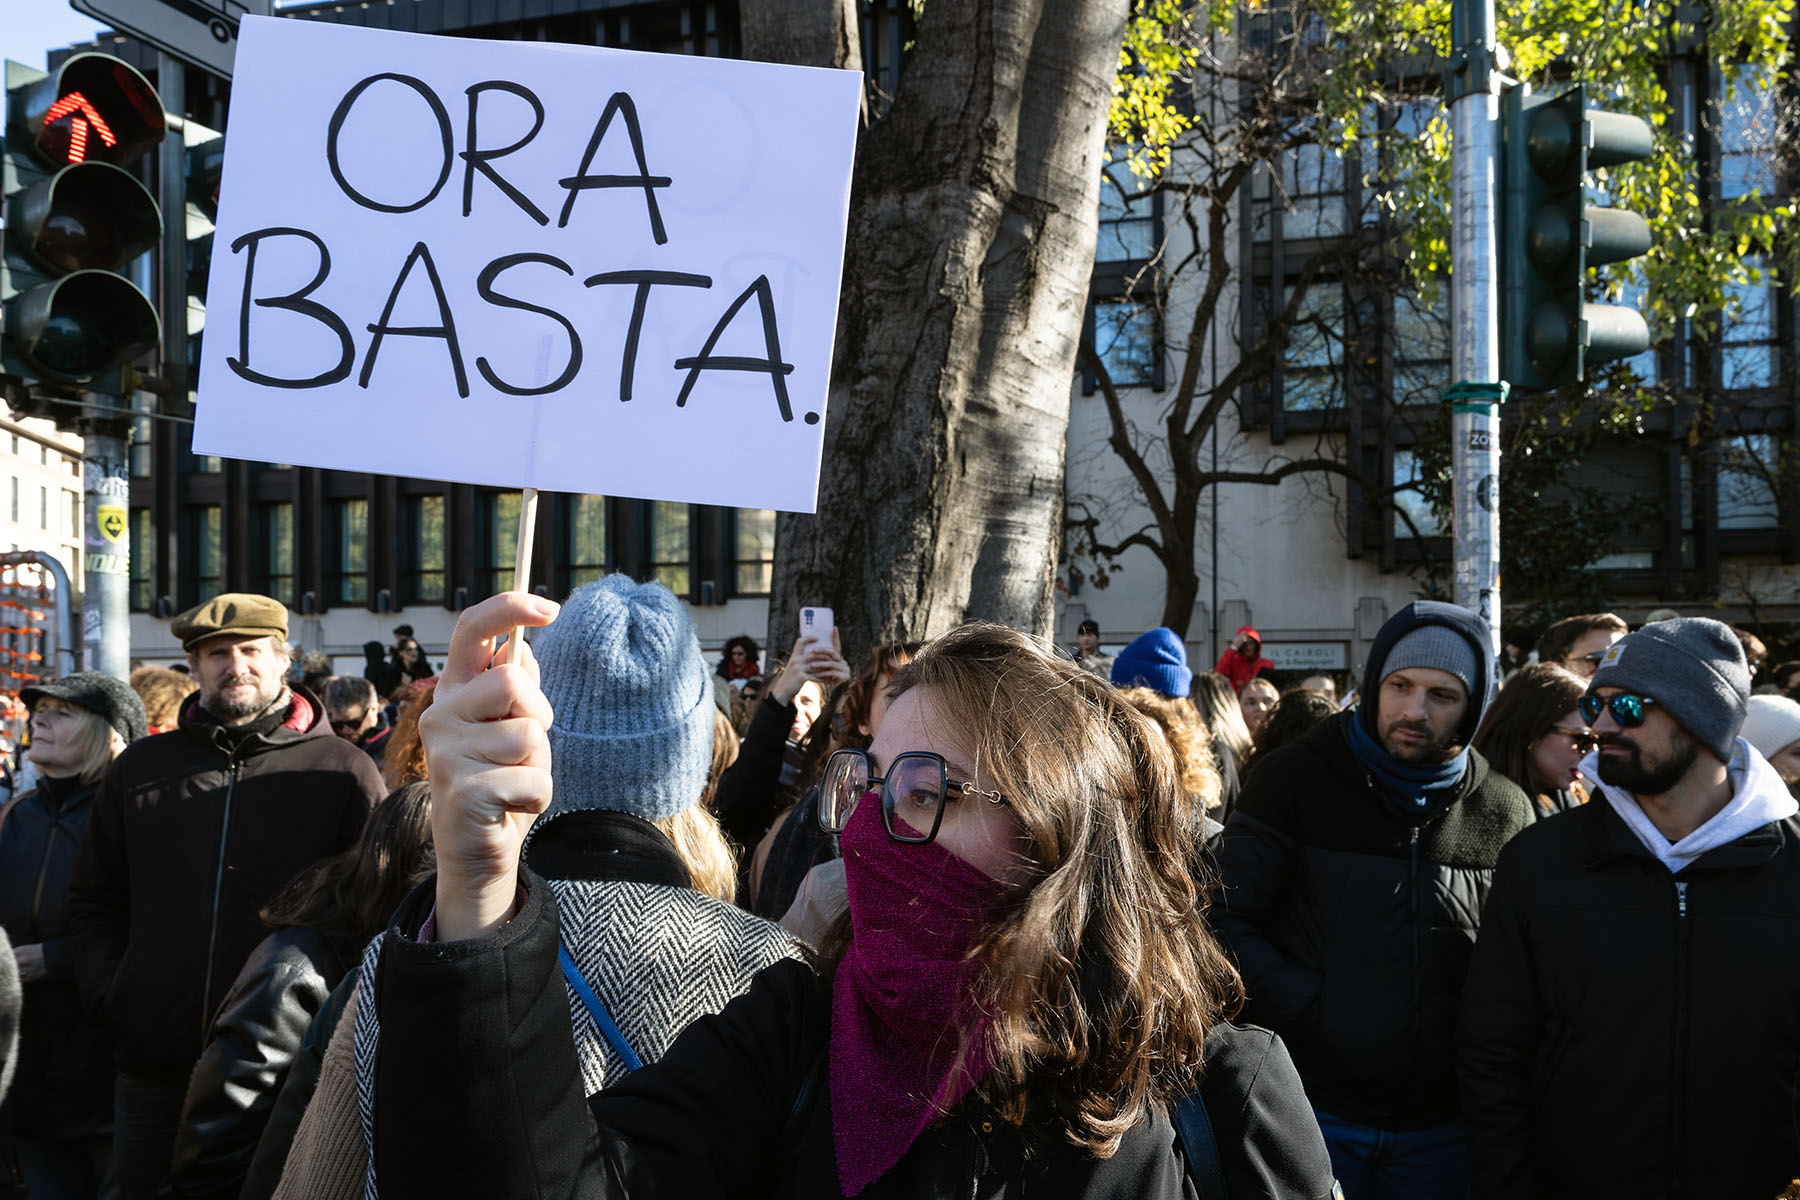 An activist holds a sign that says "No basta" (It's enough) during the 2023 "Il Patriarcato Uccide" (Patriarchy Kills) demonstration in Milan.